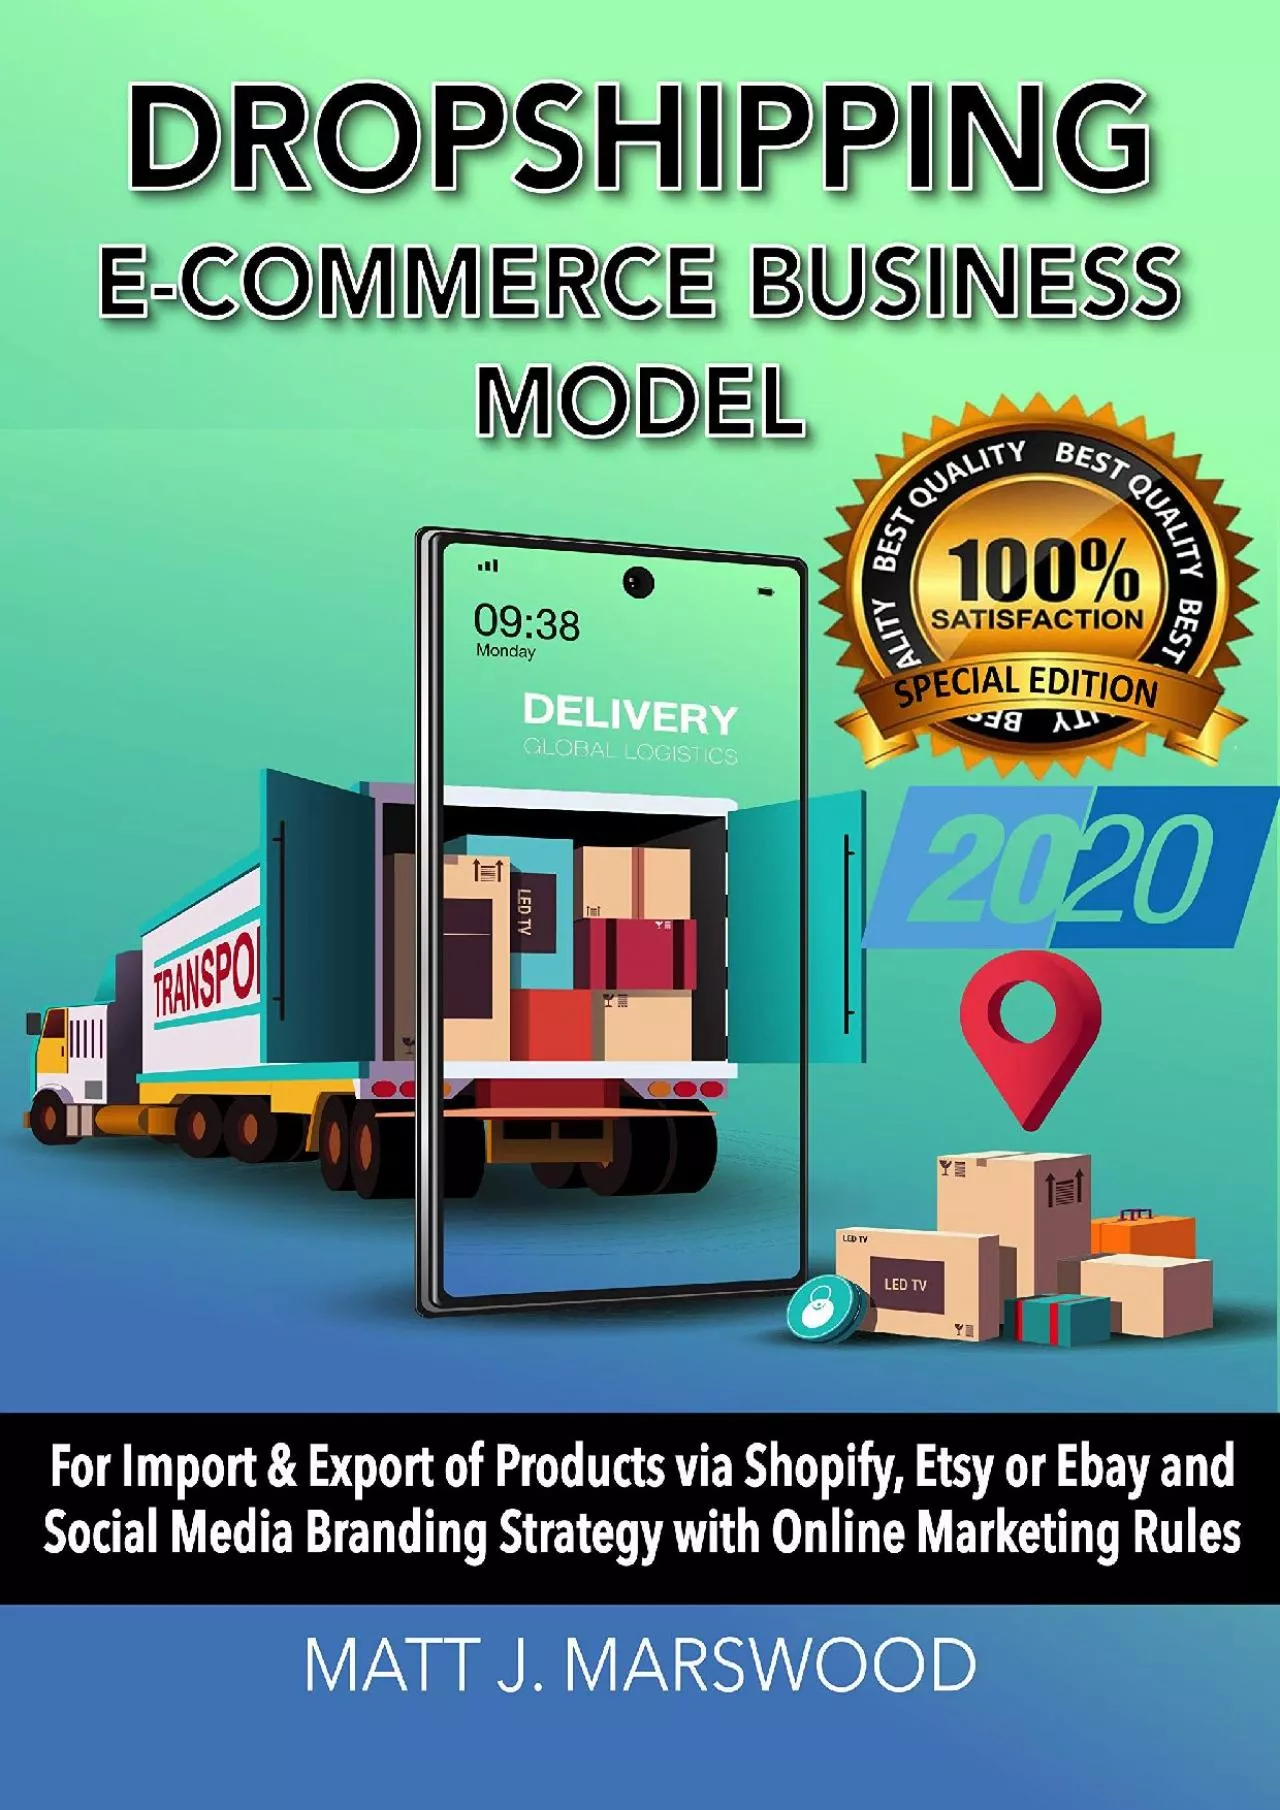 Dropshipping: E-commerce Business Model for Import & Export of Products via Shopify Etsy